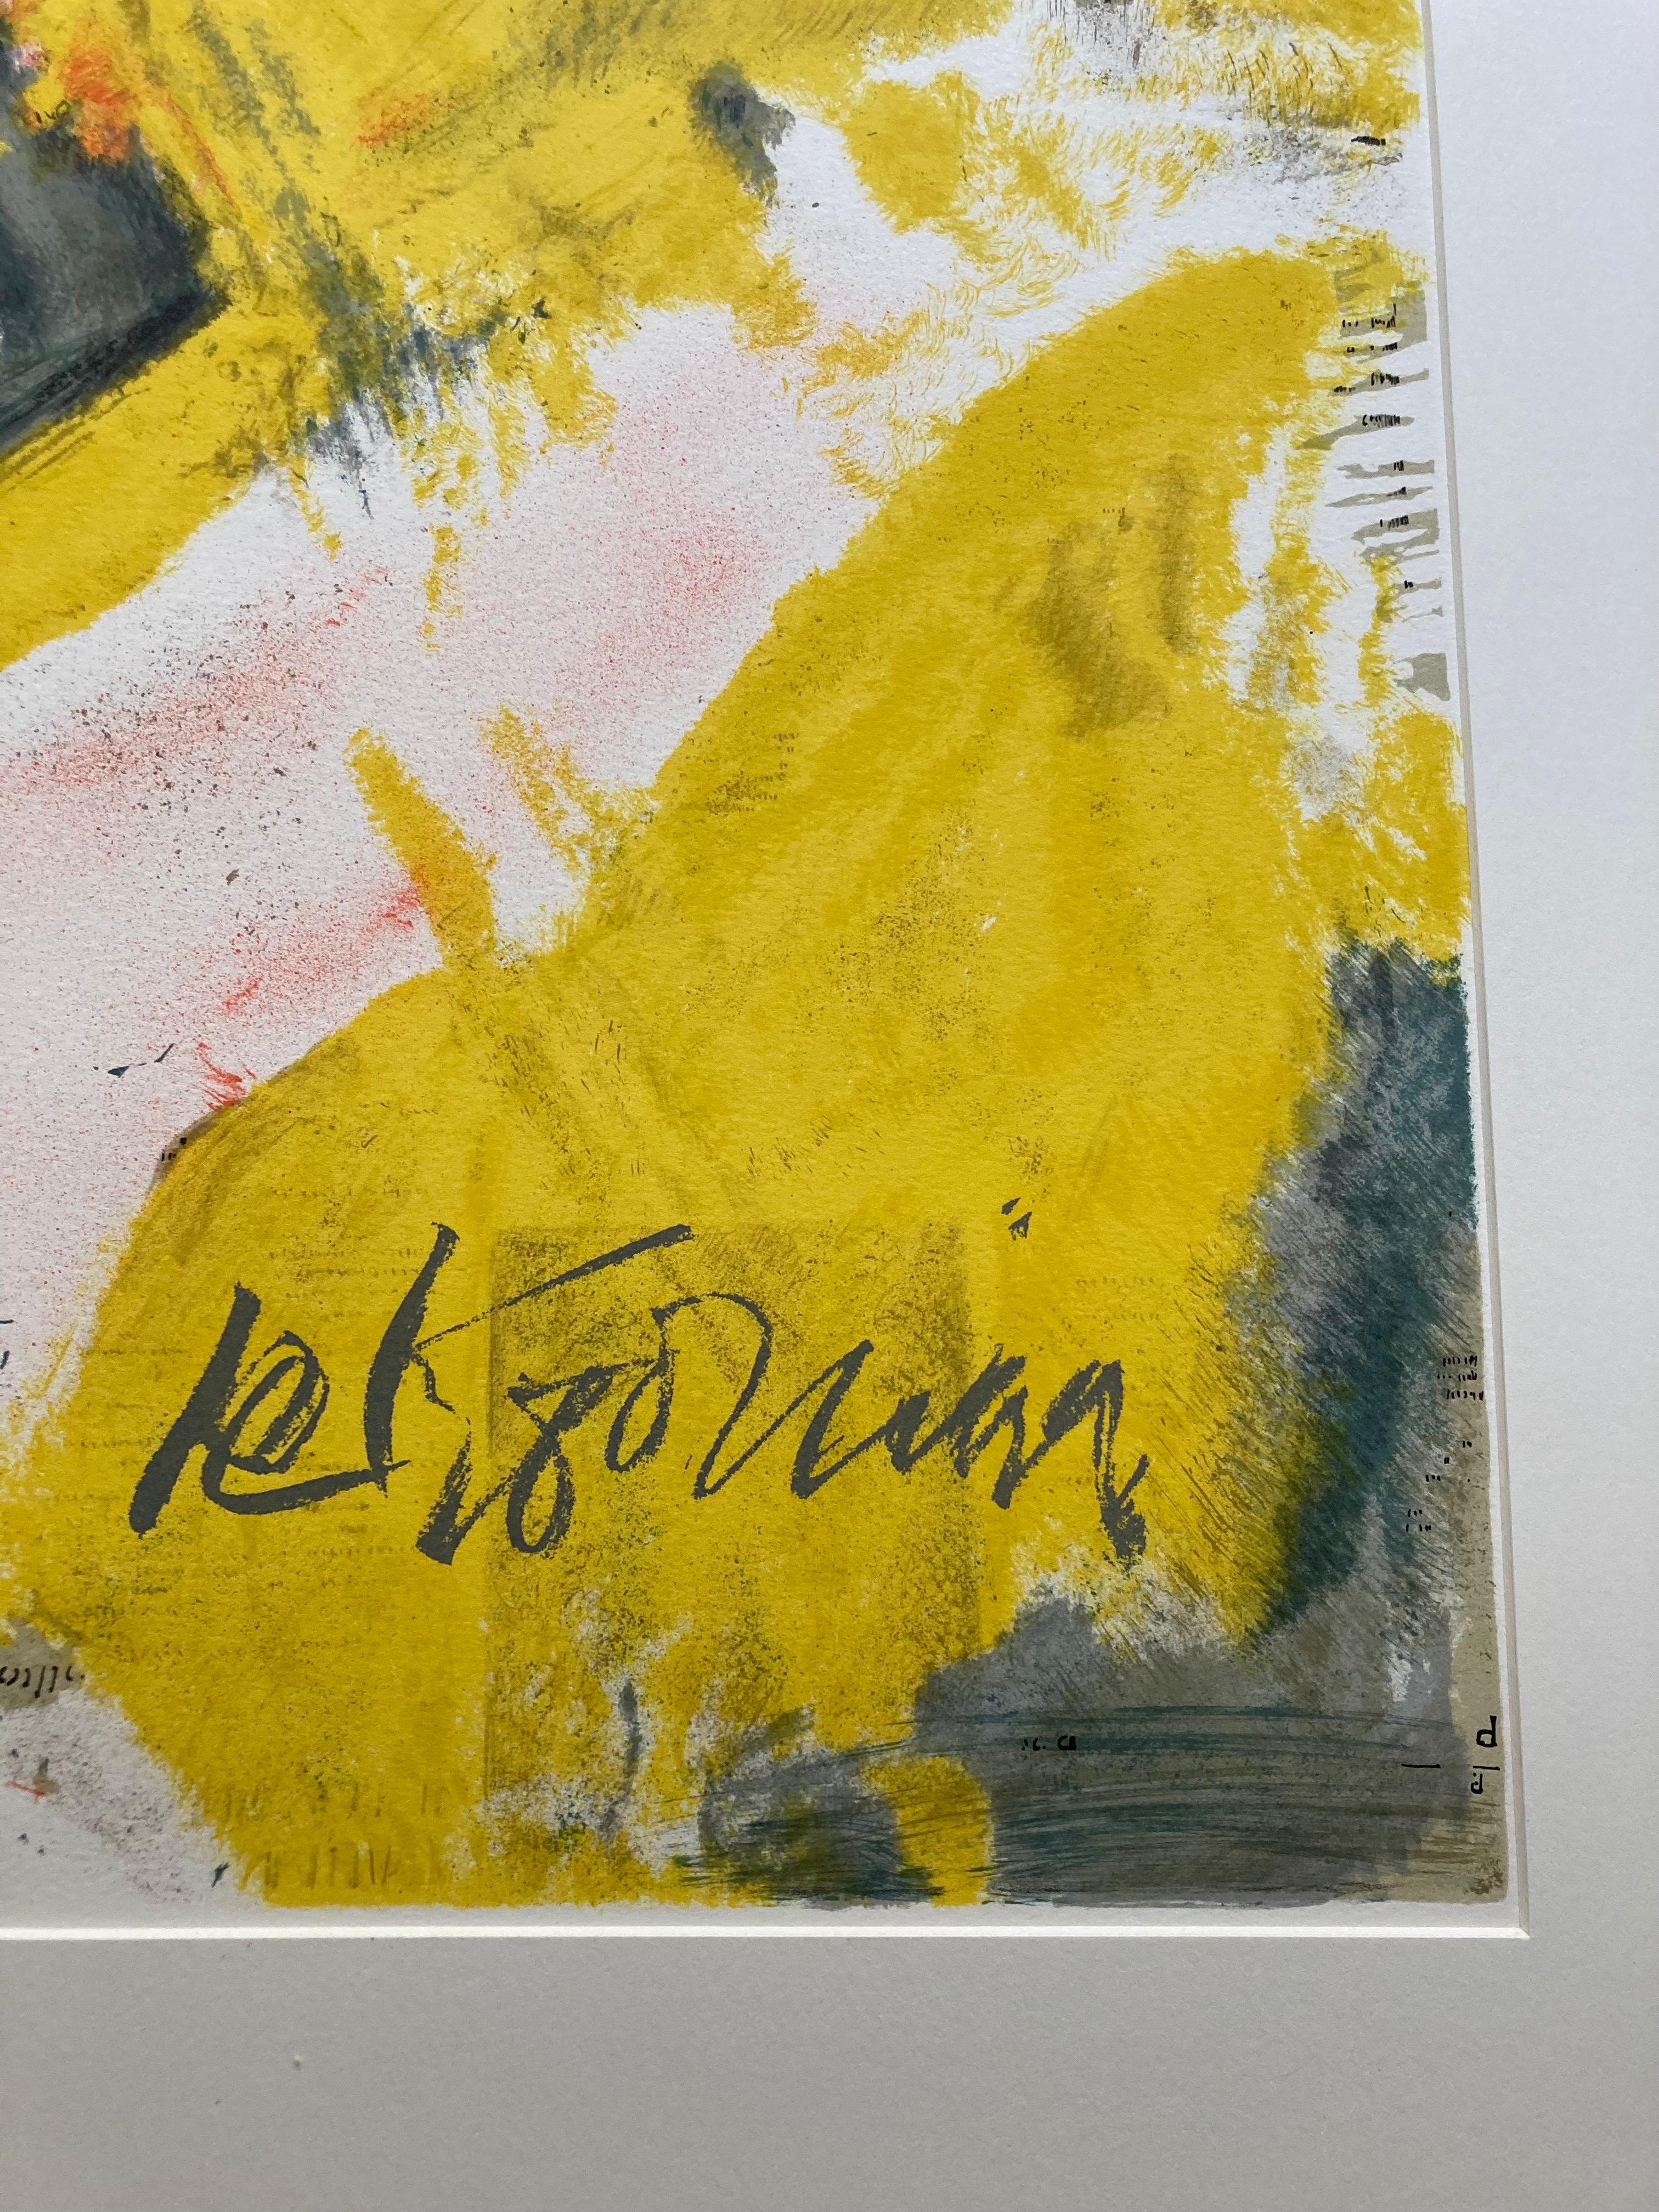 Willem de Kooning (Dutch/American, 1904-1997)
'The Man and the Big Blond', 1982
Color lithograph on paper
Number 88 from the edition of 150 (plus 15 artist's proofs)  
Signed in plate, hand numbered 